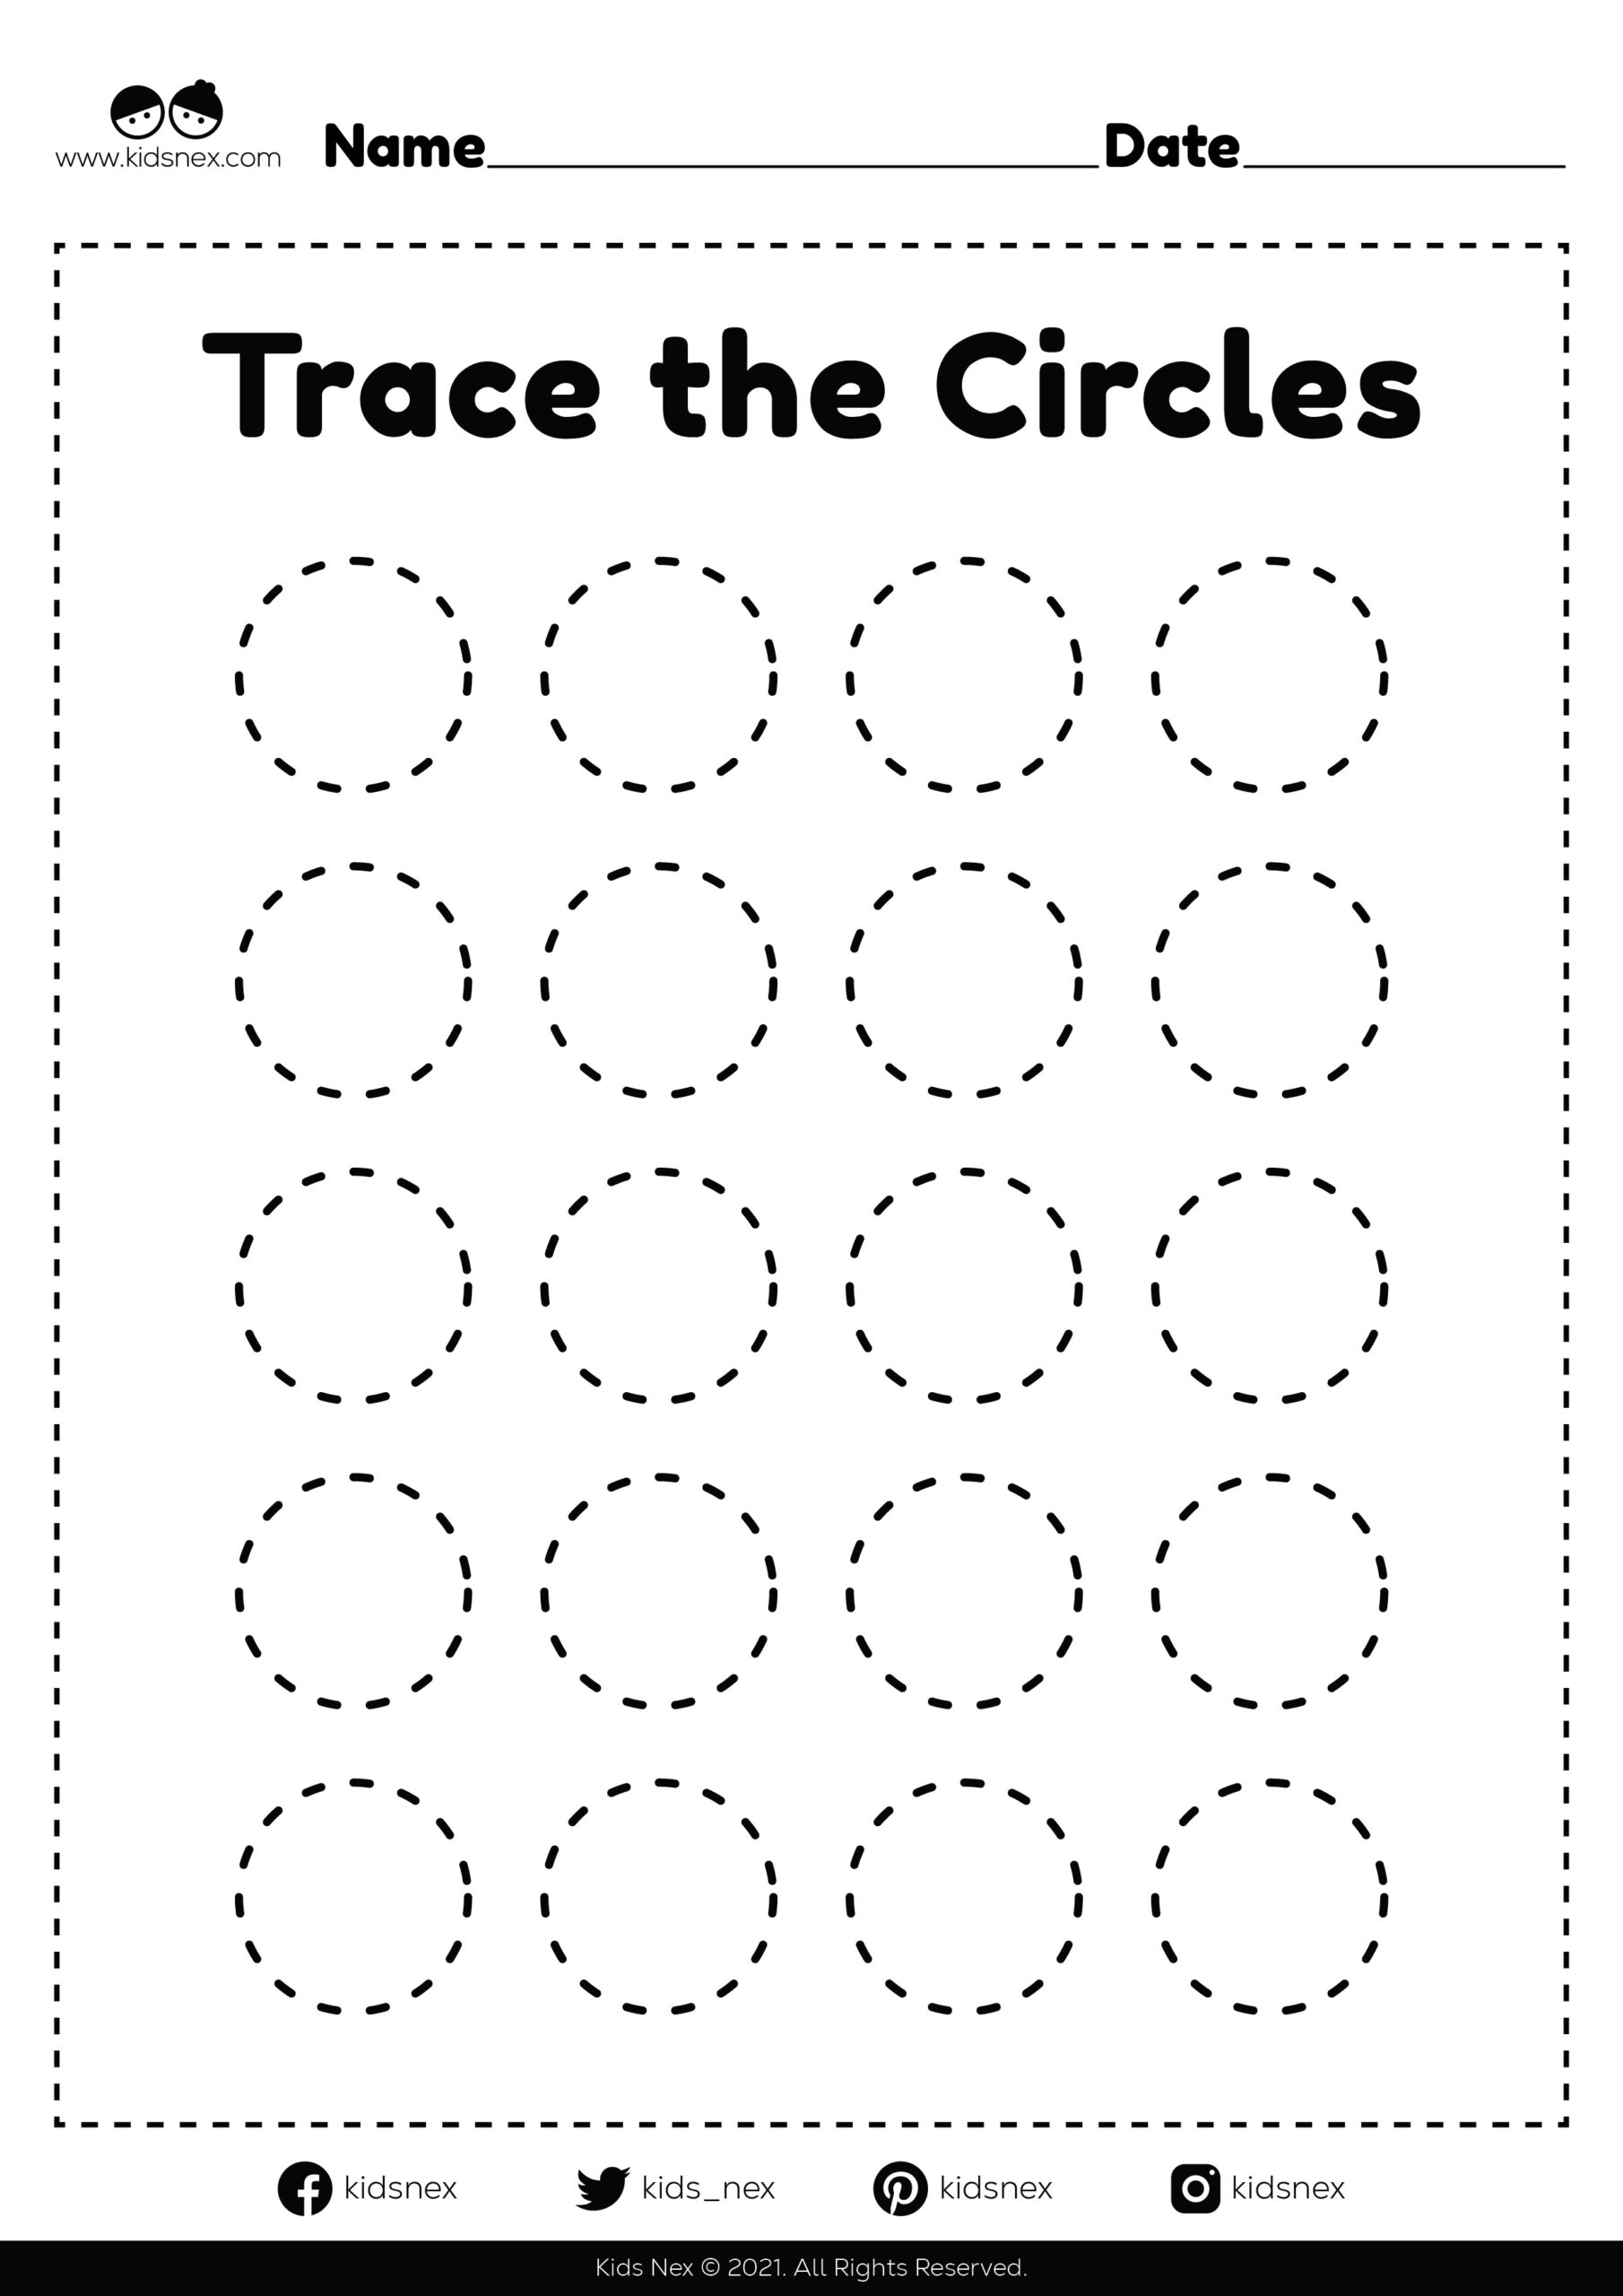 Circle shape worksheet for kindergarten and preschool kids free printable for daily fun and activities